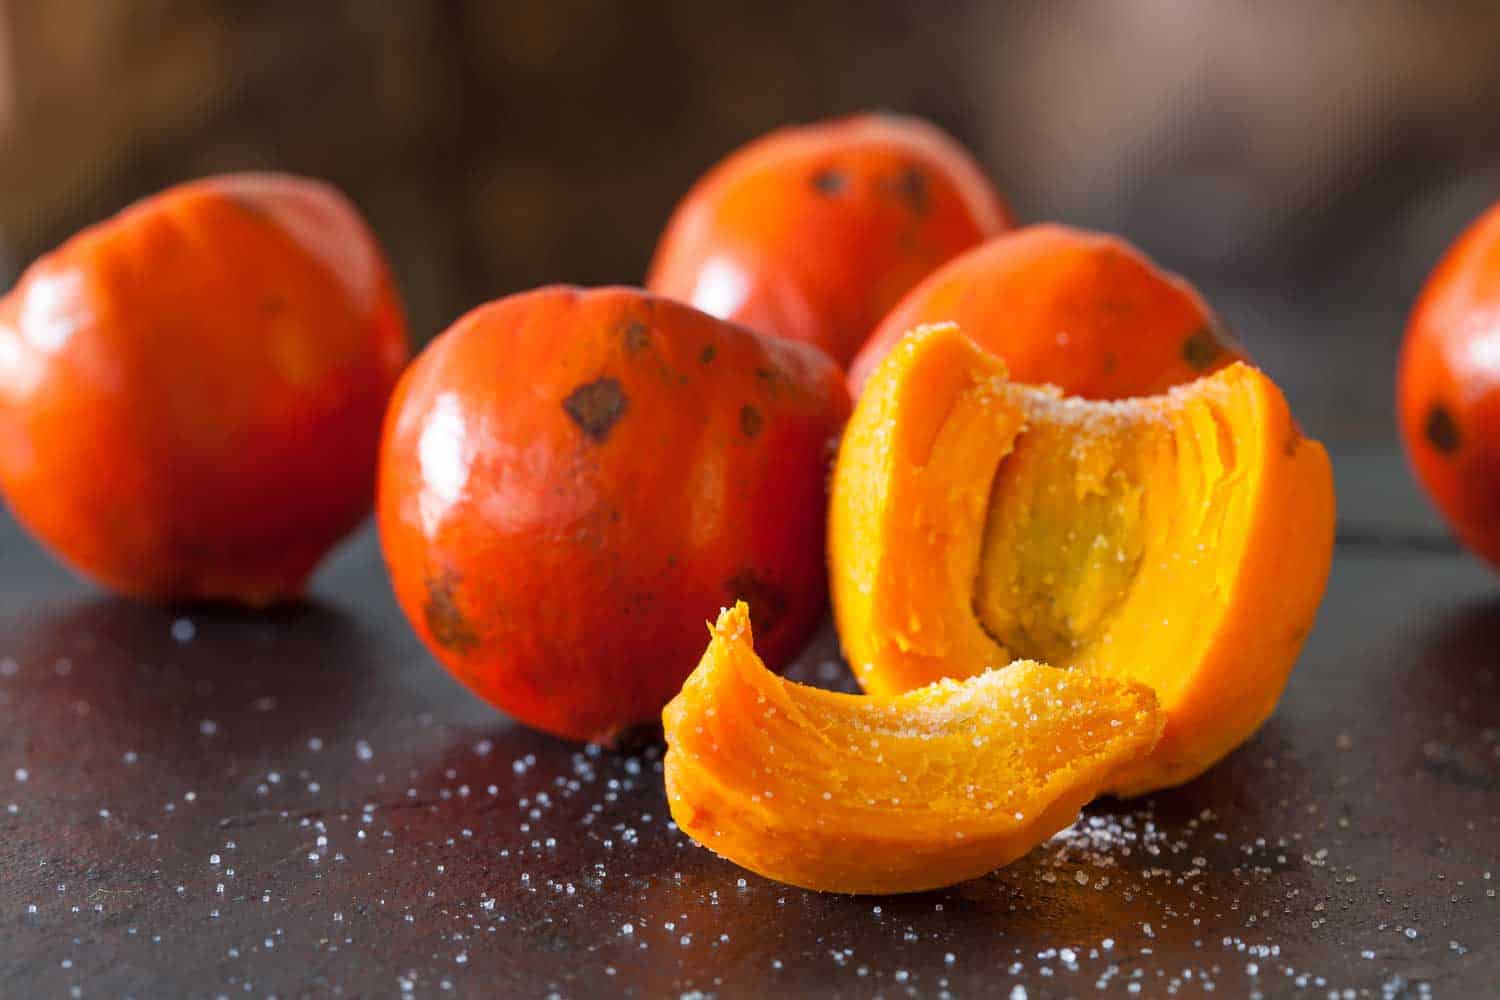 9 Tropical Fruits You've Probably Never Heard Of!